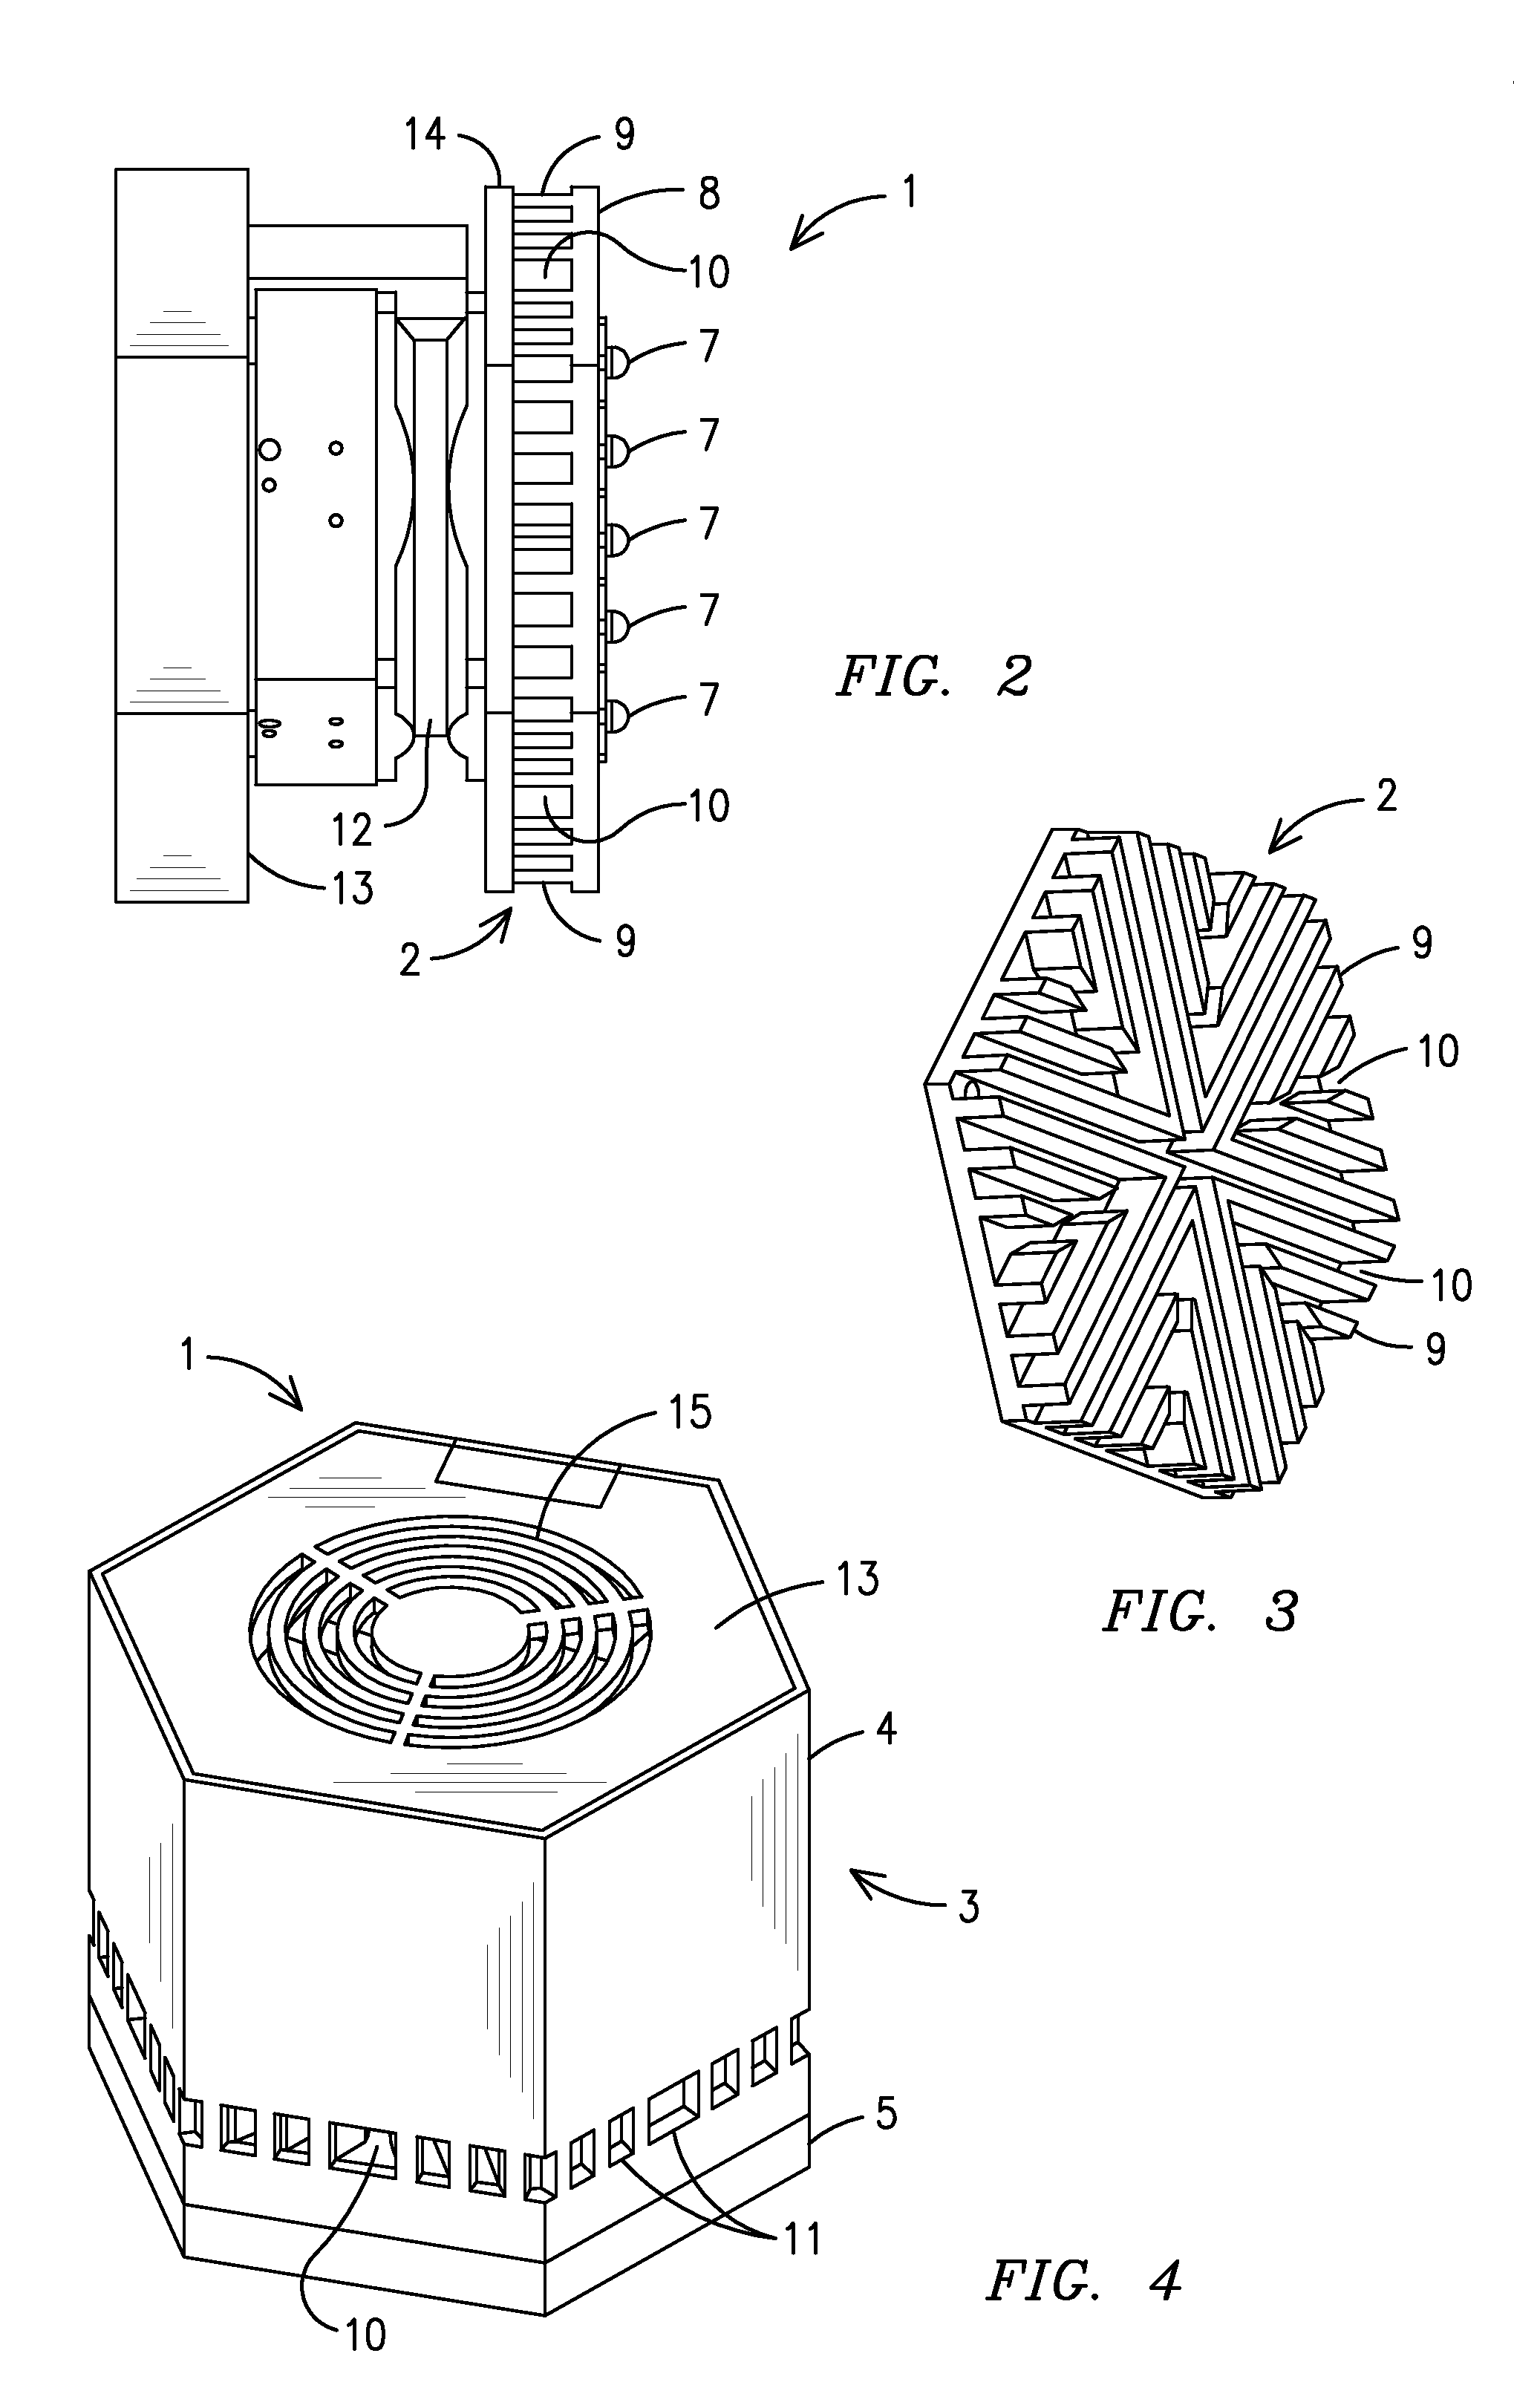 LED lamp with actively cooled heat sink